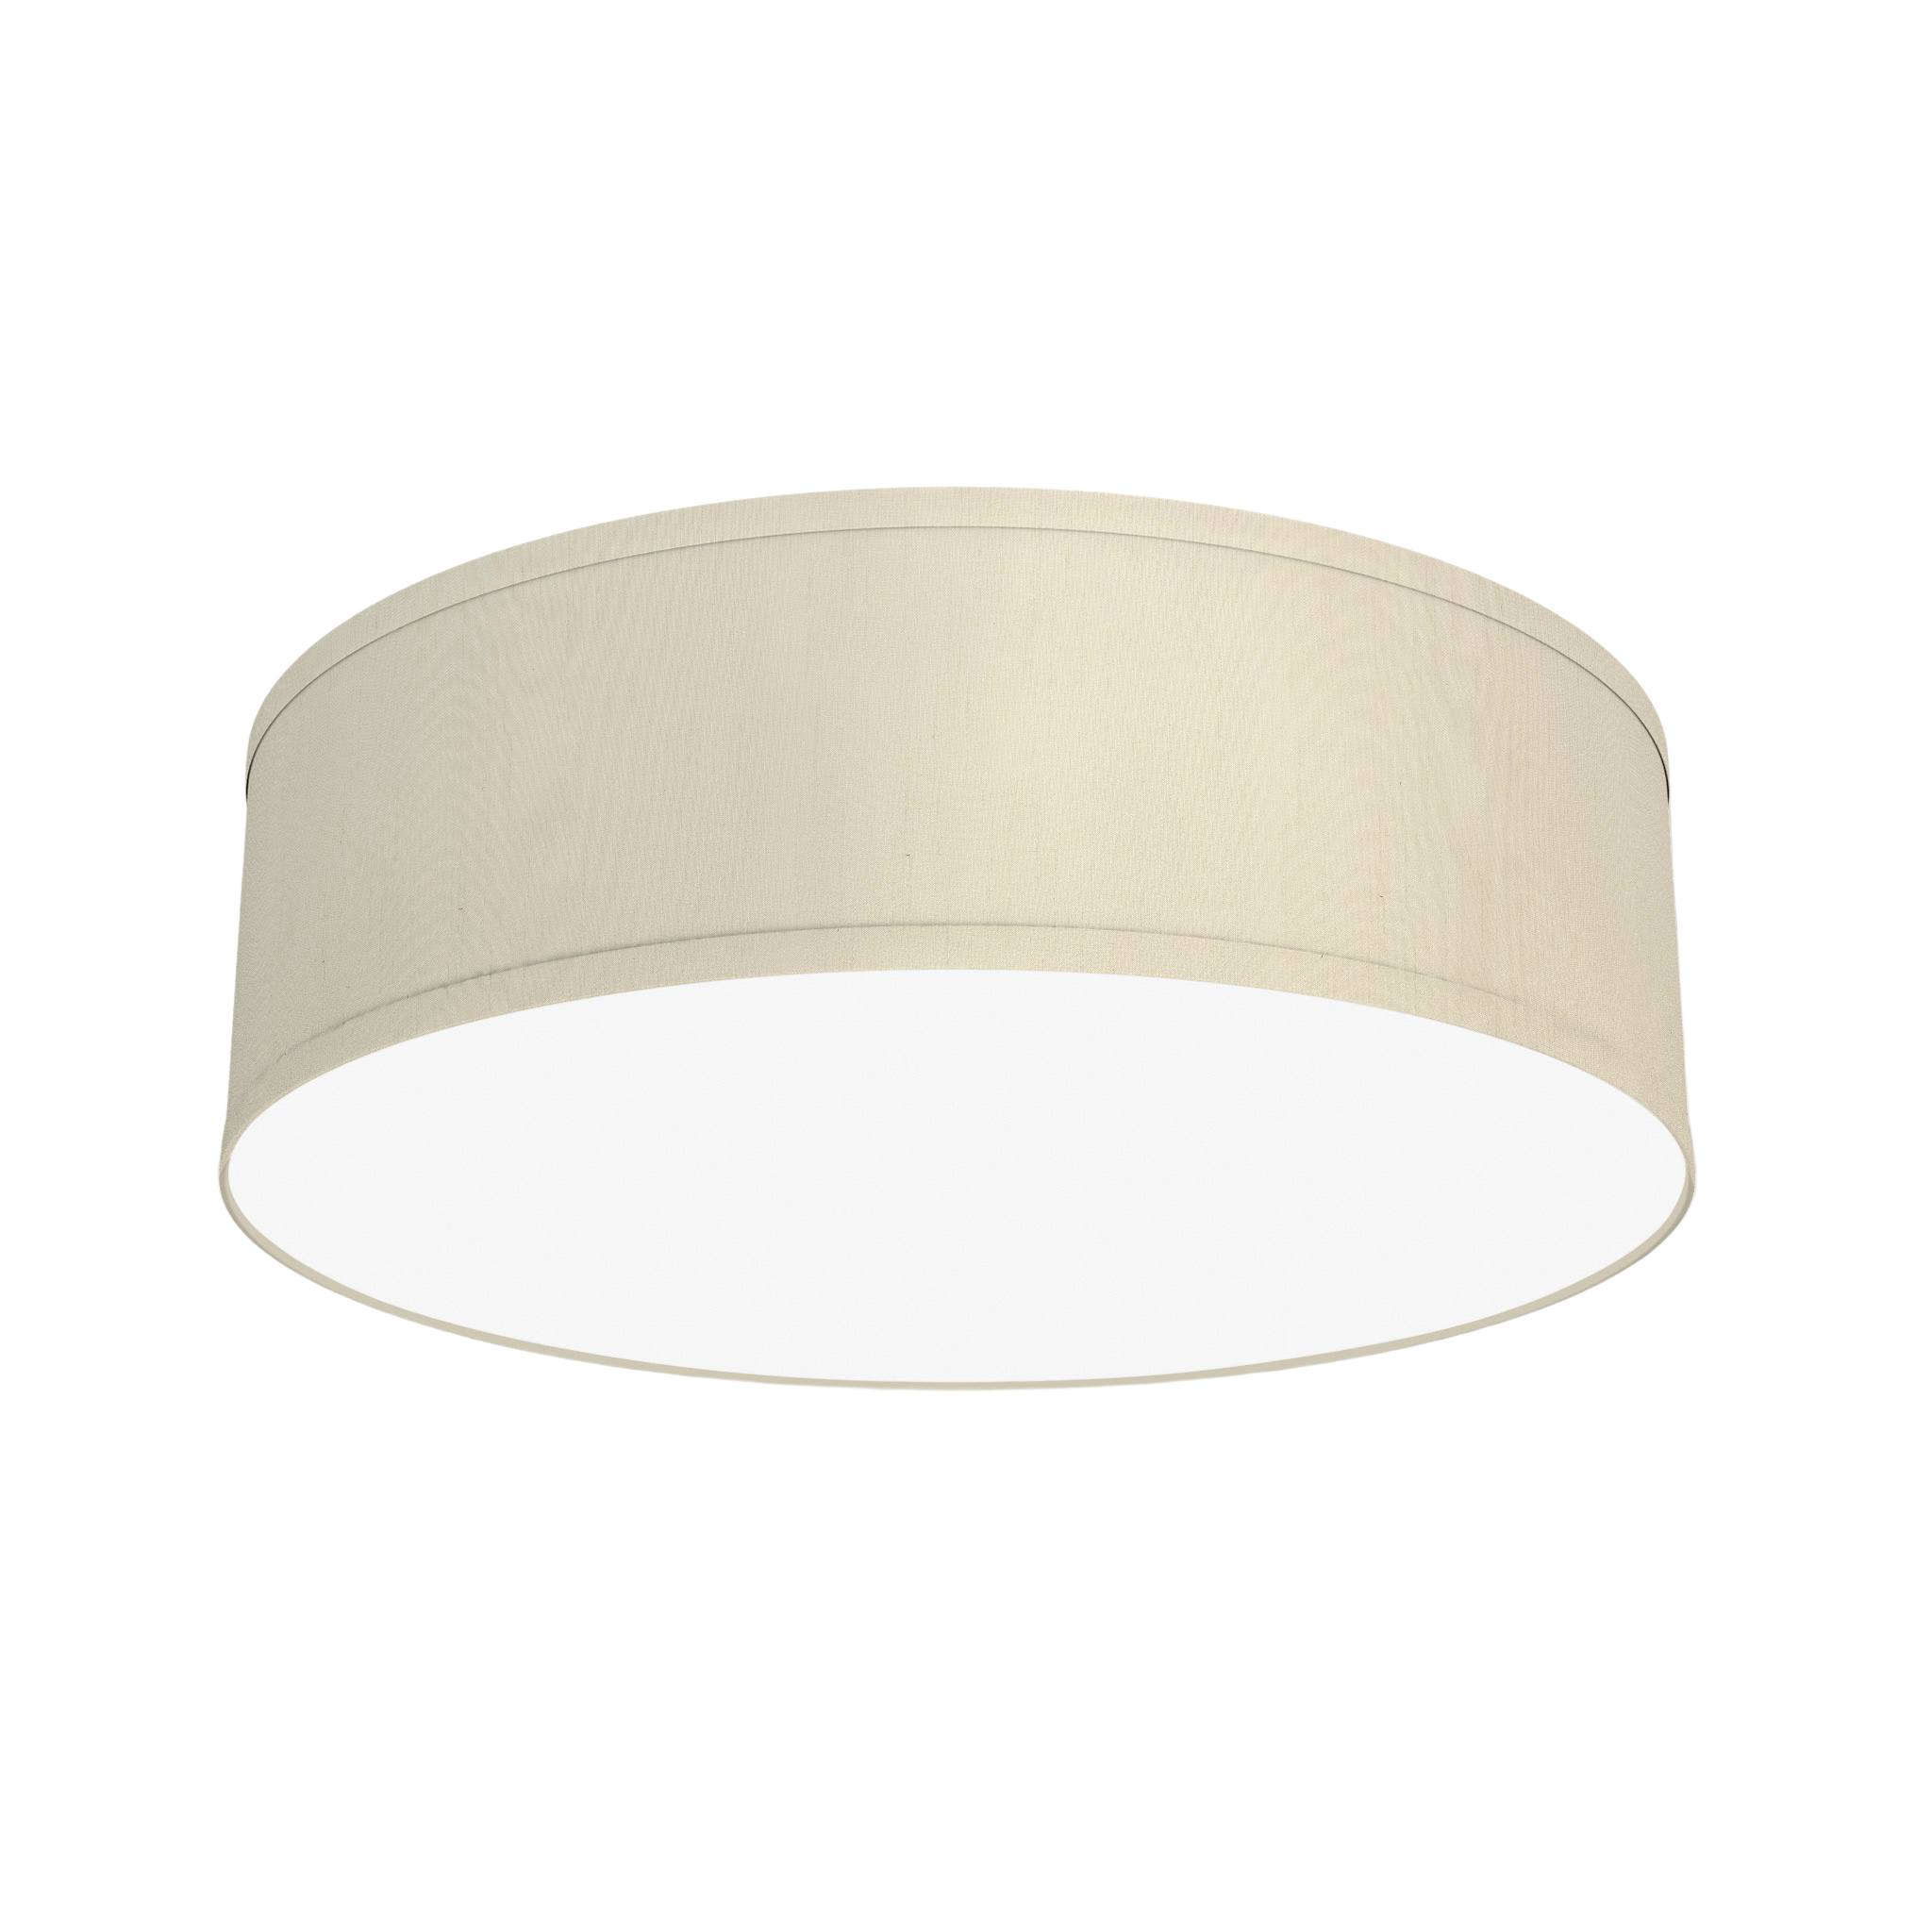 The Amy Semi Flush Mount from Seascape Fixtures in silk, cream color.